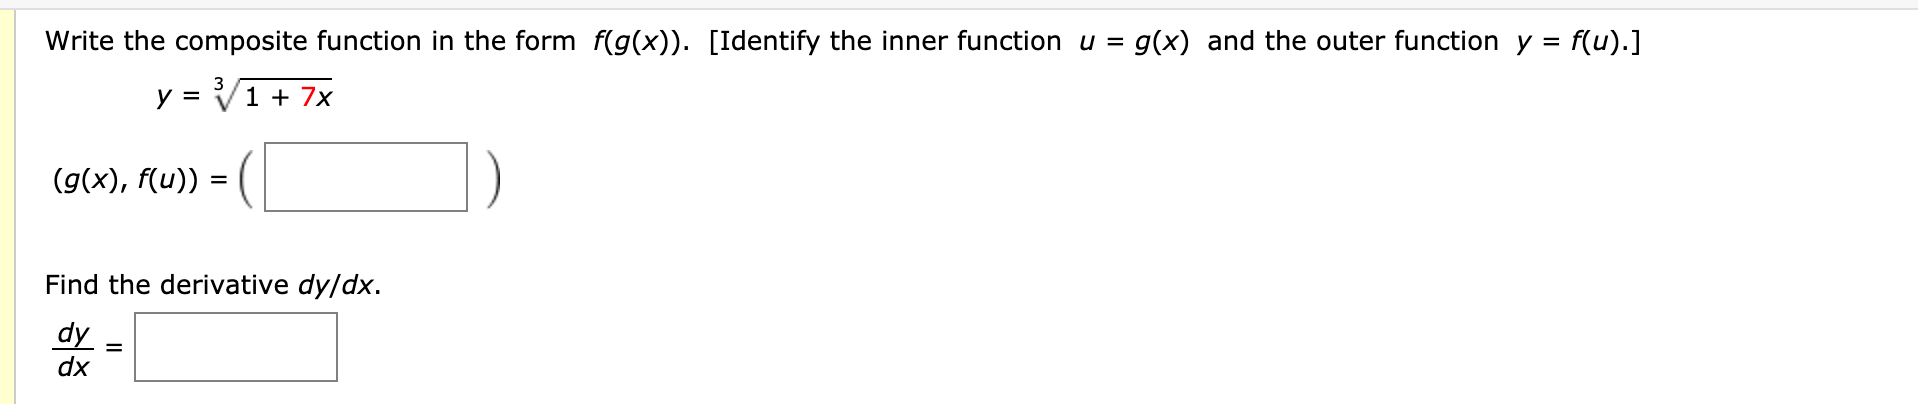 Write the composite function in the form f(g(x)). [Identify the inner function u = g(x) and the outer function y = f(u).]
y = V1 + 7x
(9(х), f(u)) -
Find the derivative dy/dx.
dy
dx
